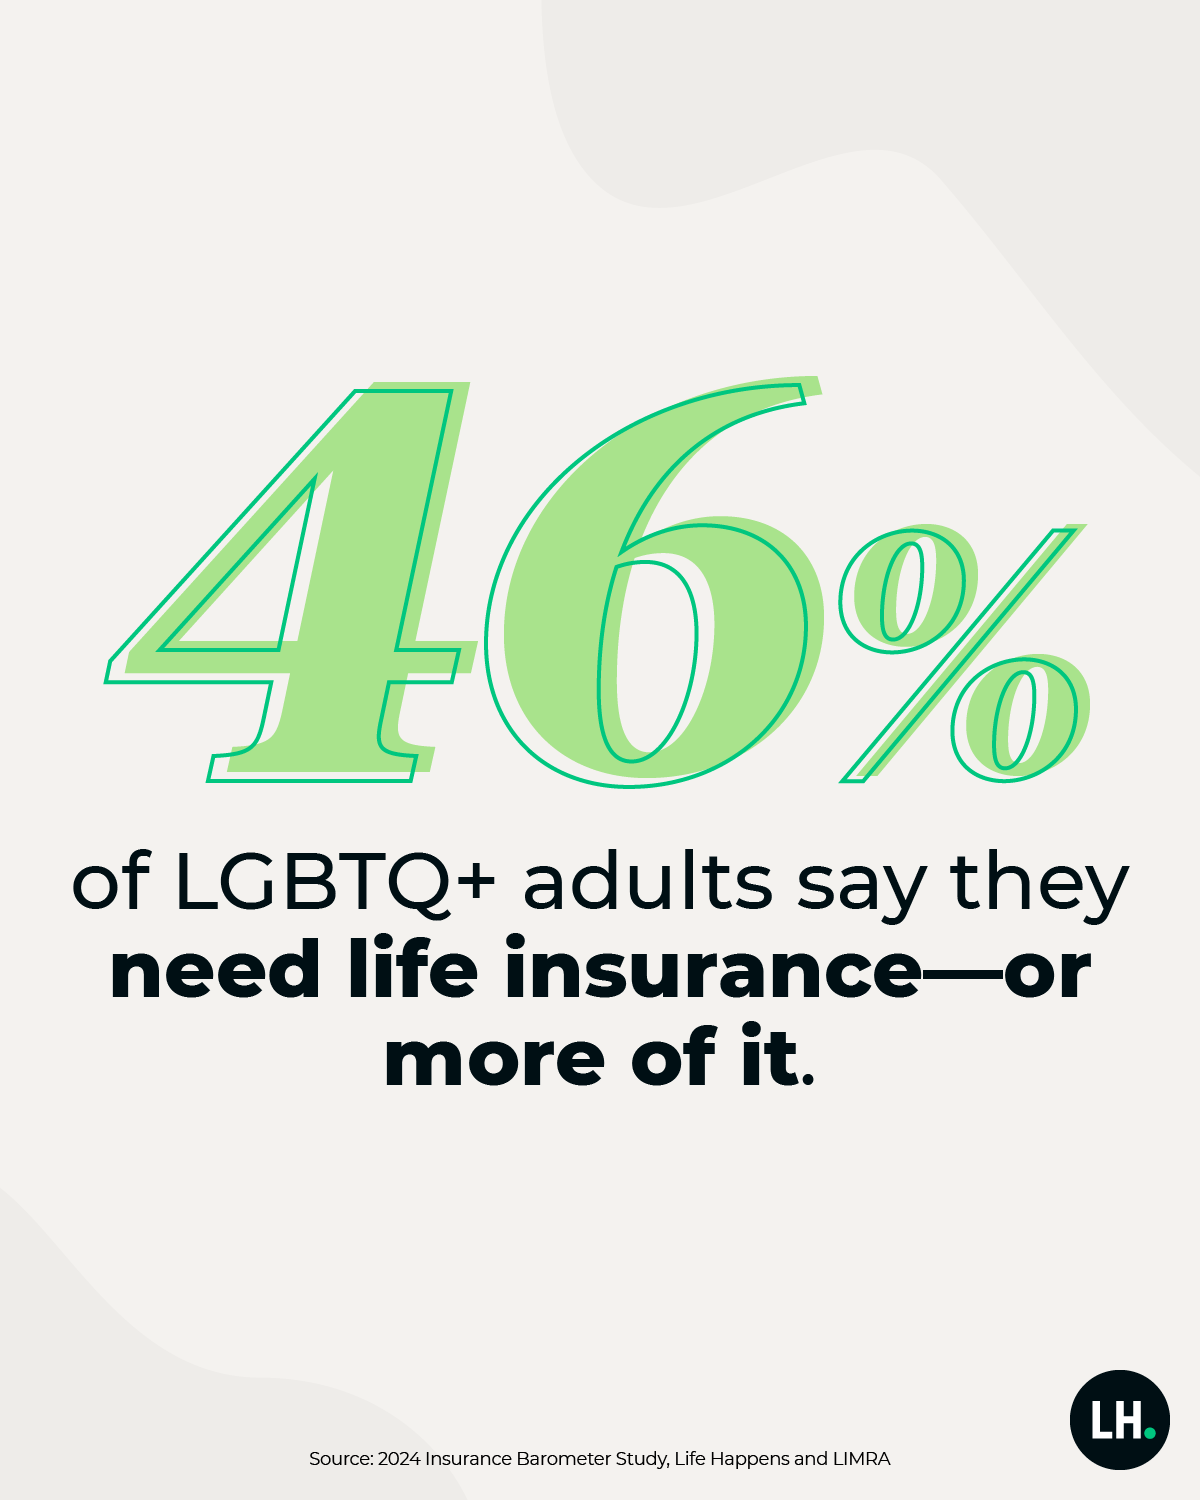 46% of LGBTQ adults say they need life insurance—or more of it. 